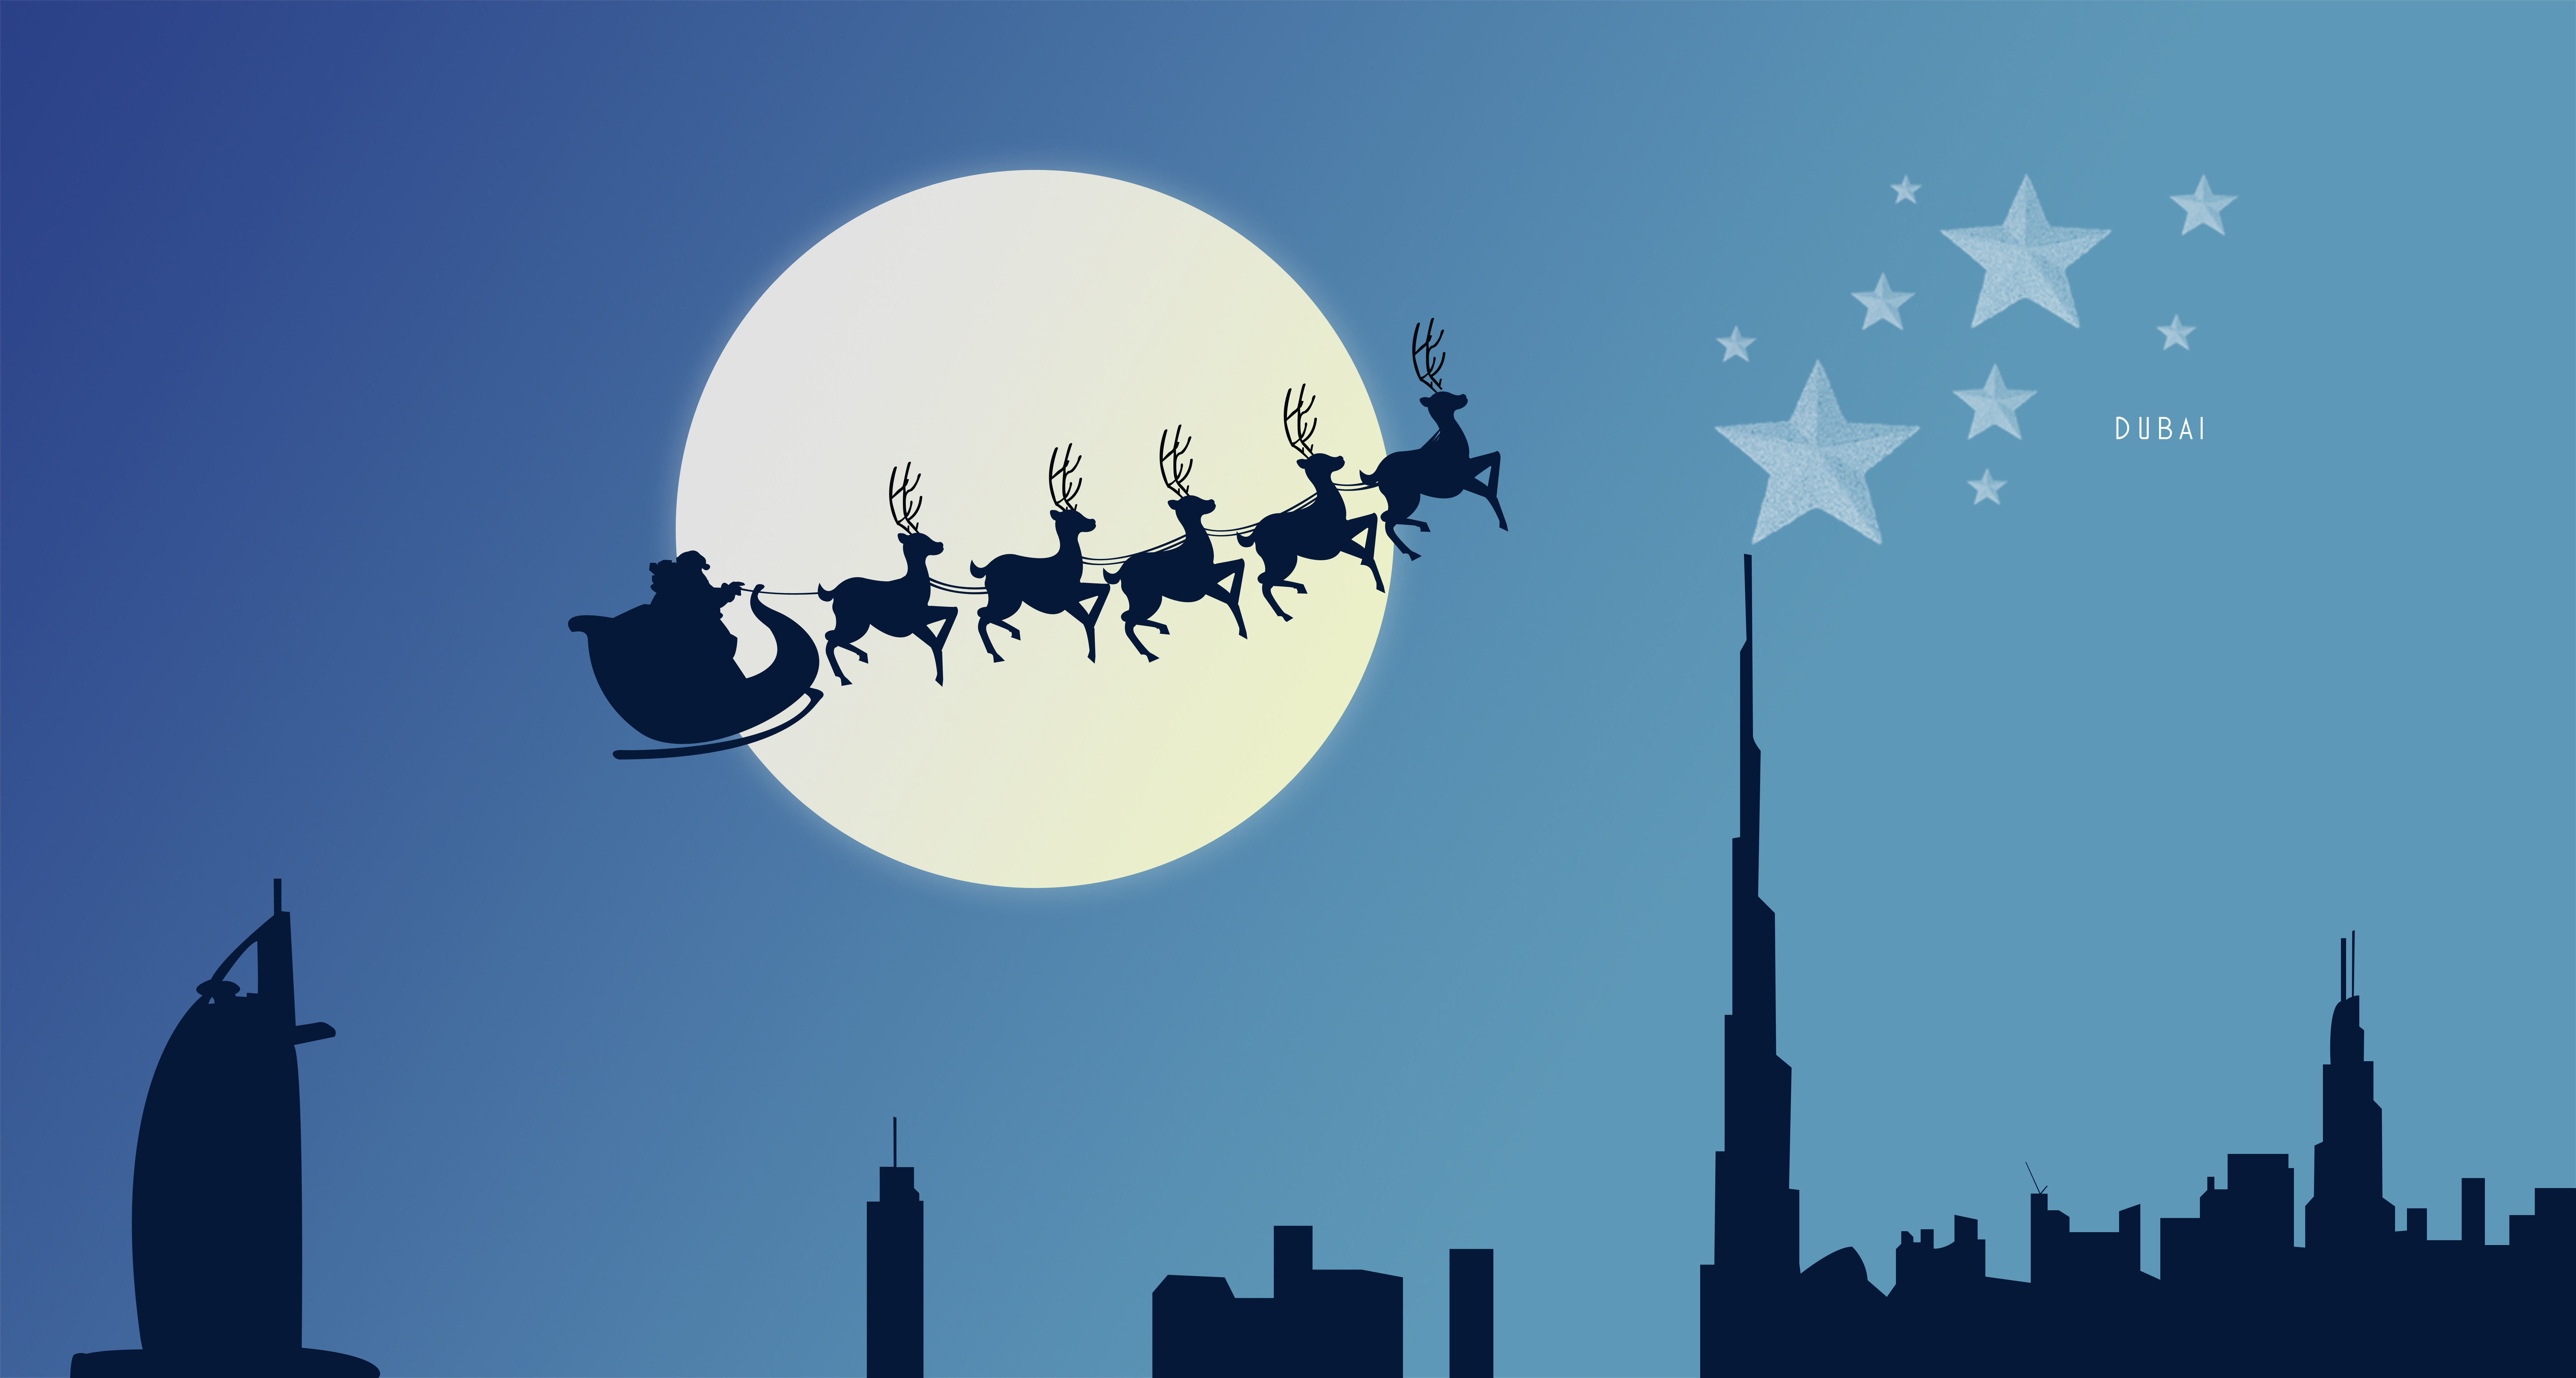 Download mobile wallpaper Christmas, Holiday, Sleigh, Reindeer for free.